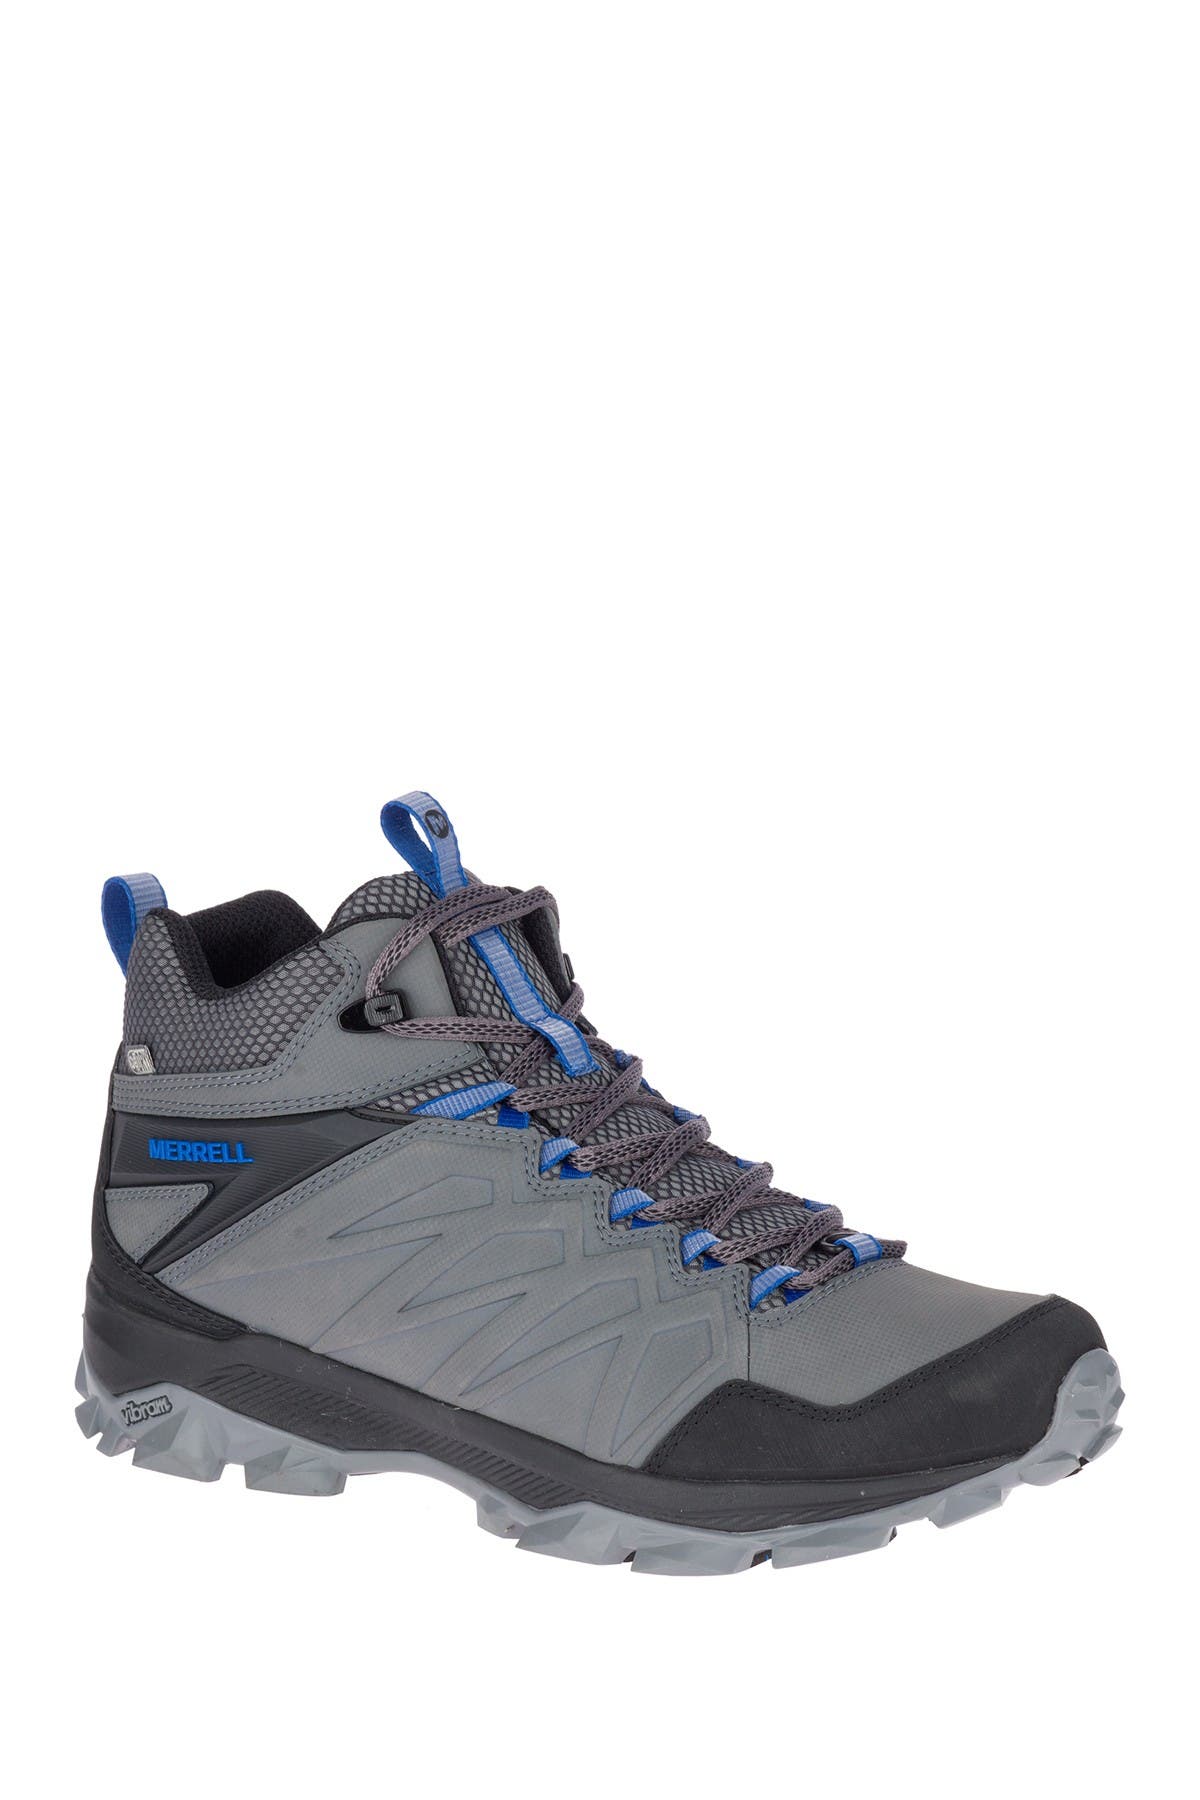 Merrell | Thermo Freeze Mid Waterproof 